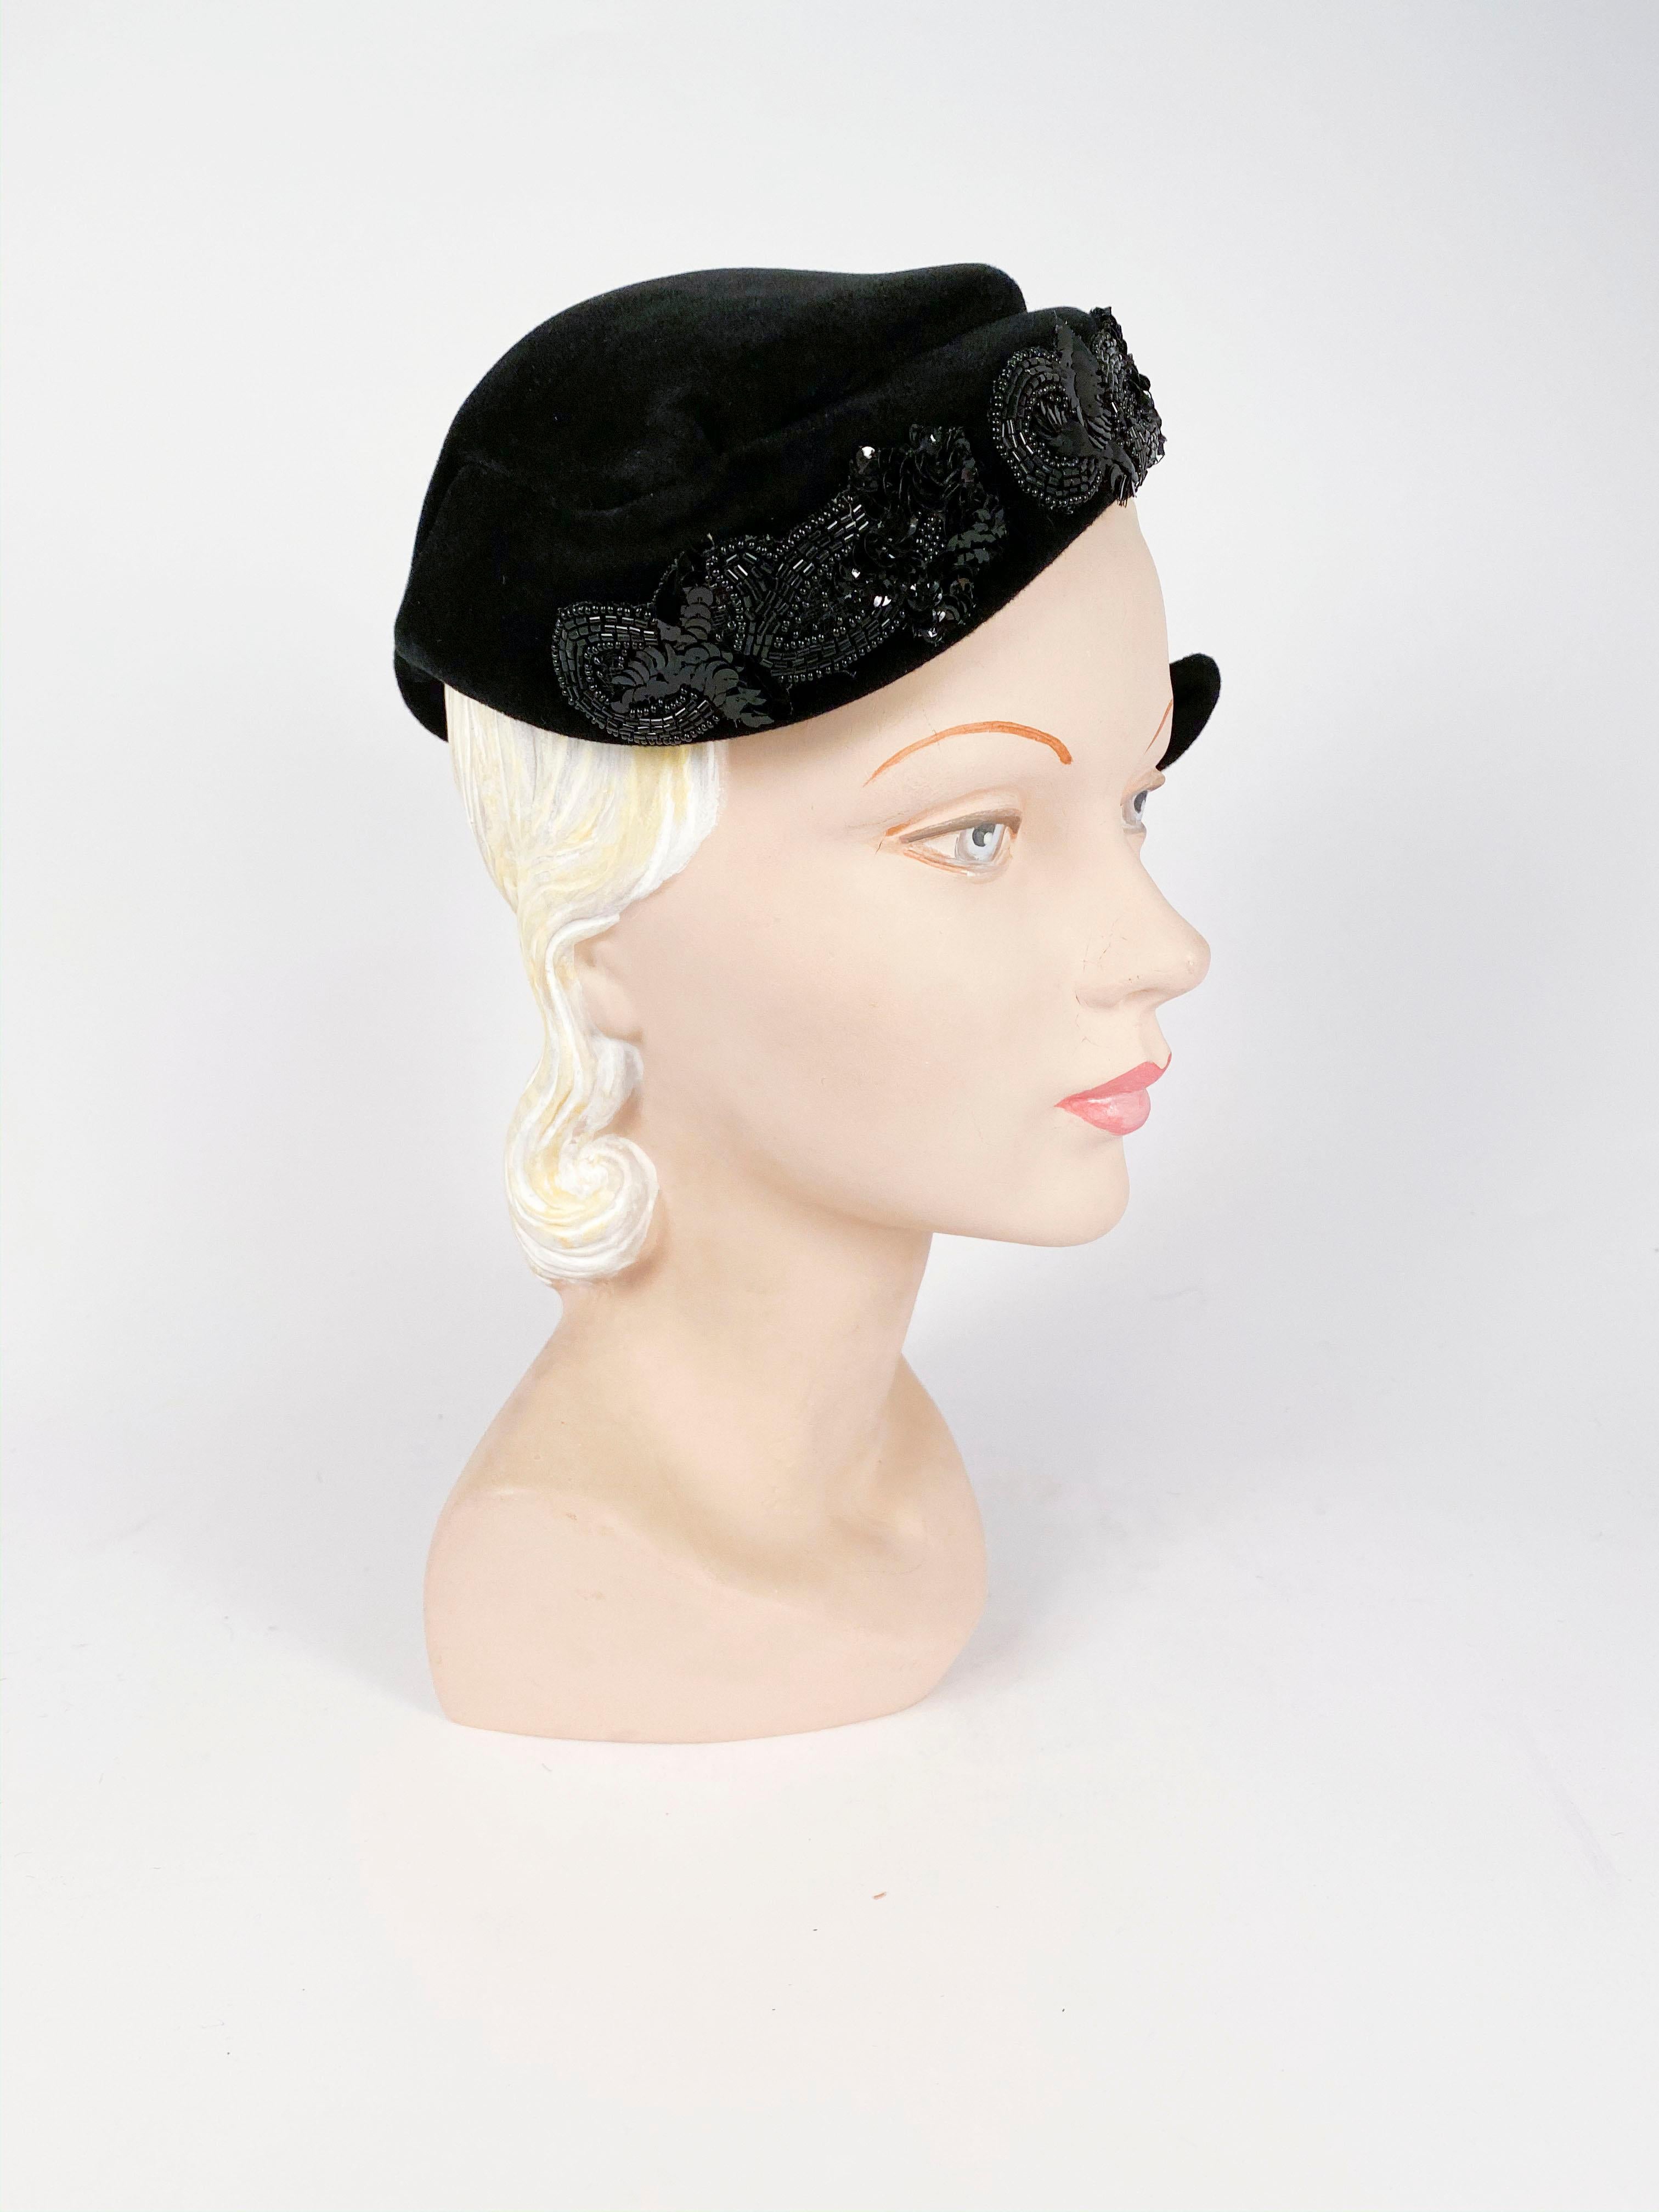 1950s Roos Bros. Black Velvet Hat featuring a black beaded and sequin appliqué to accentuate this hat's asymetrical shape. The body of the hat was made in France and it has an interior comb to reenforce this hat to the head.  